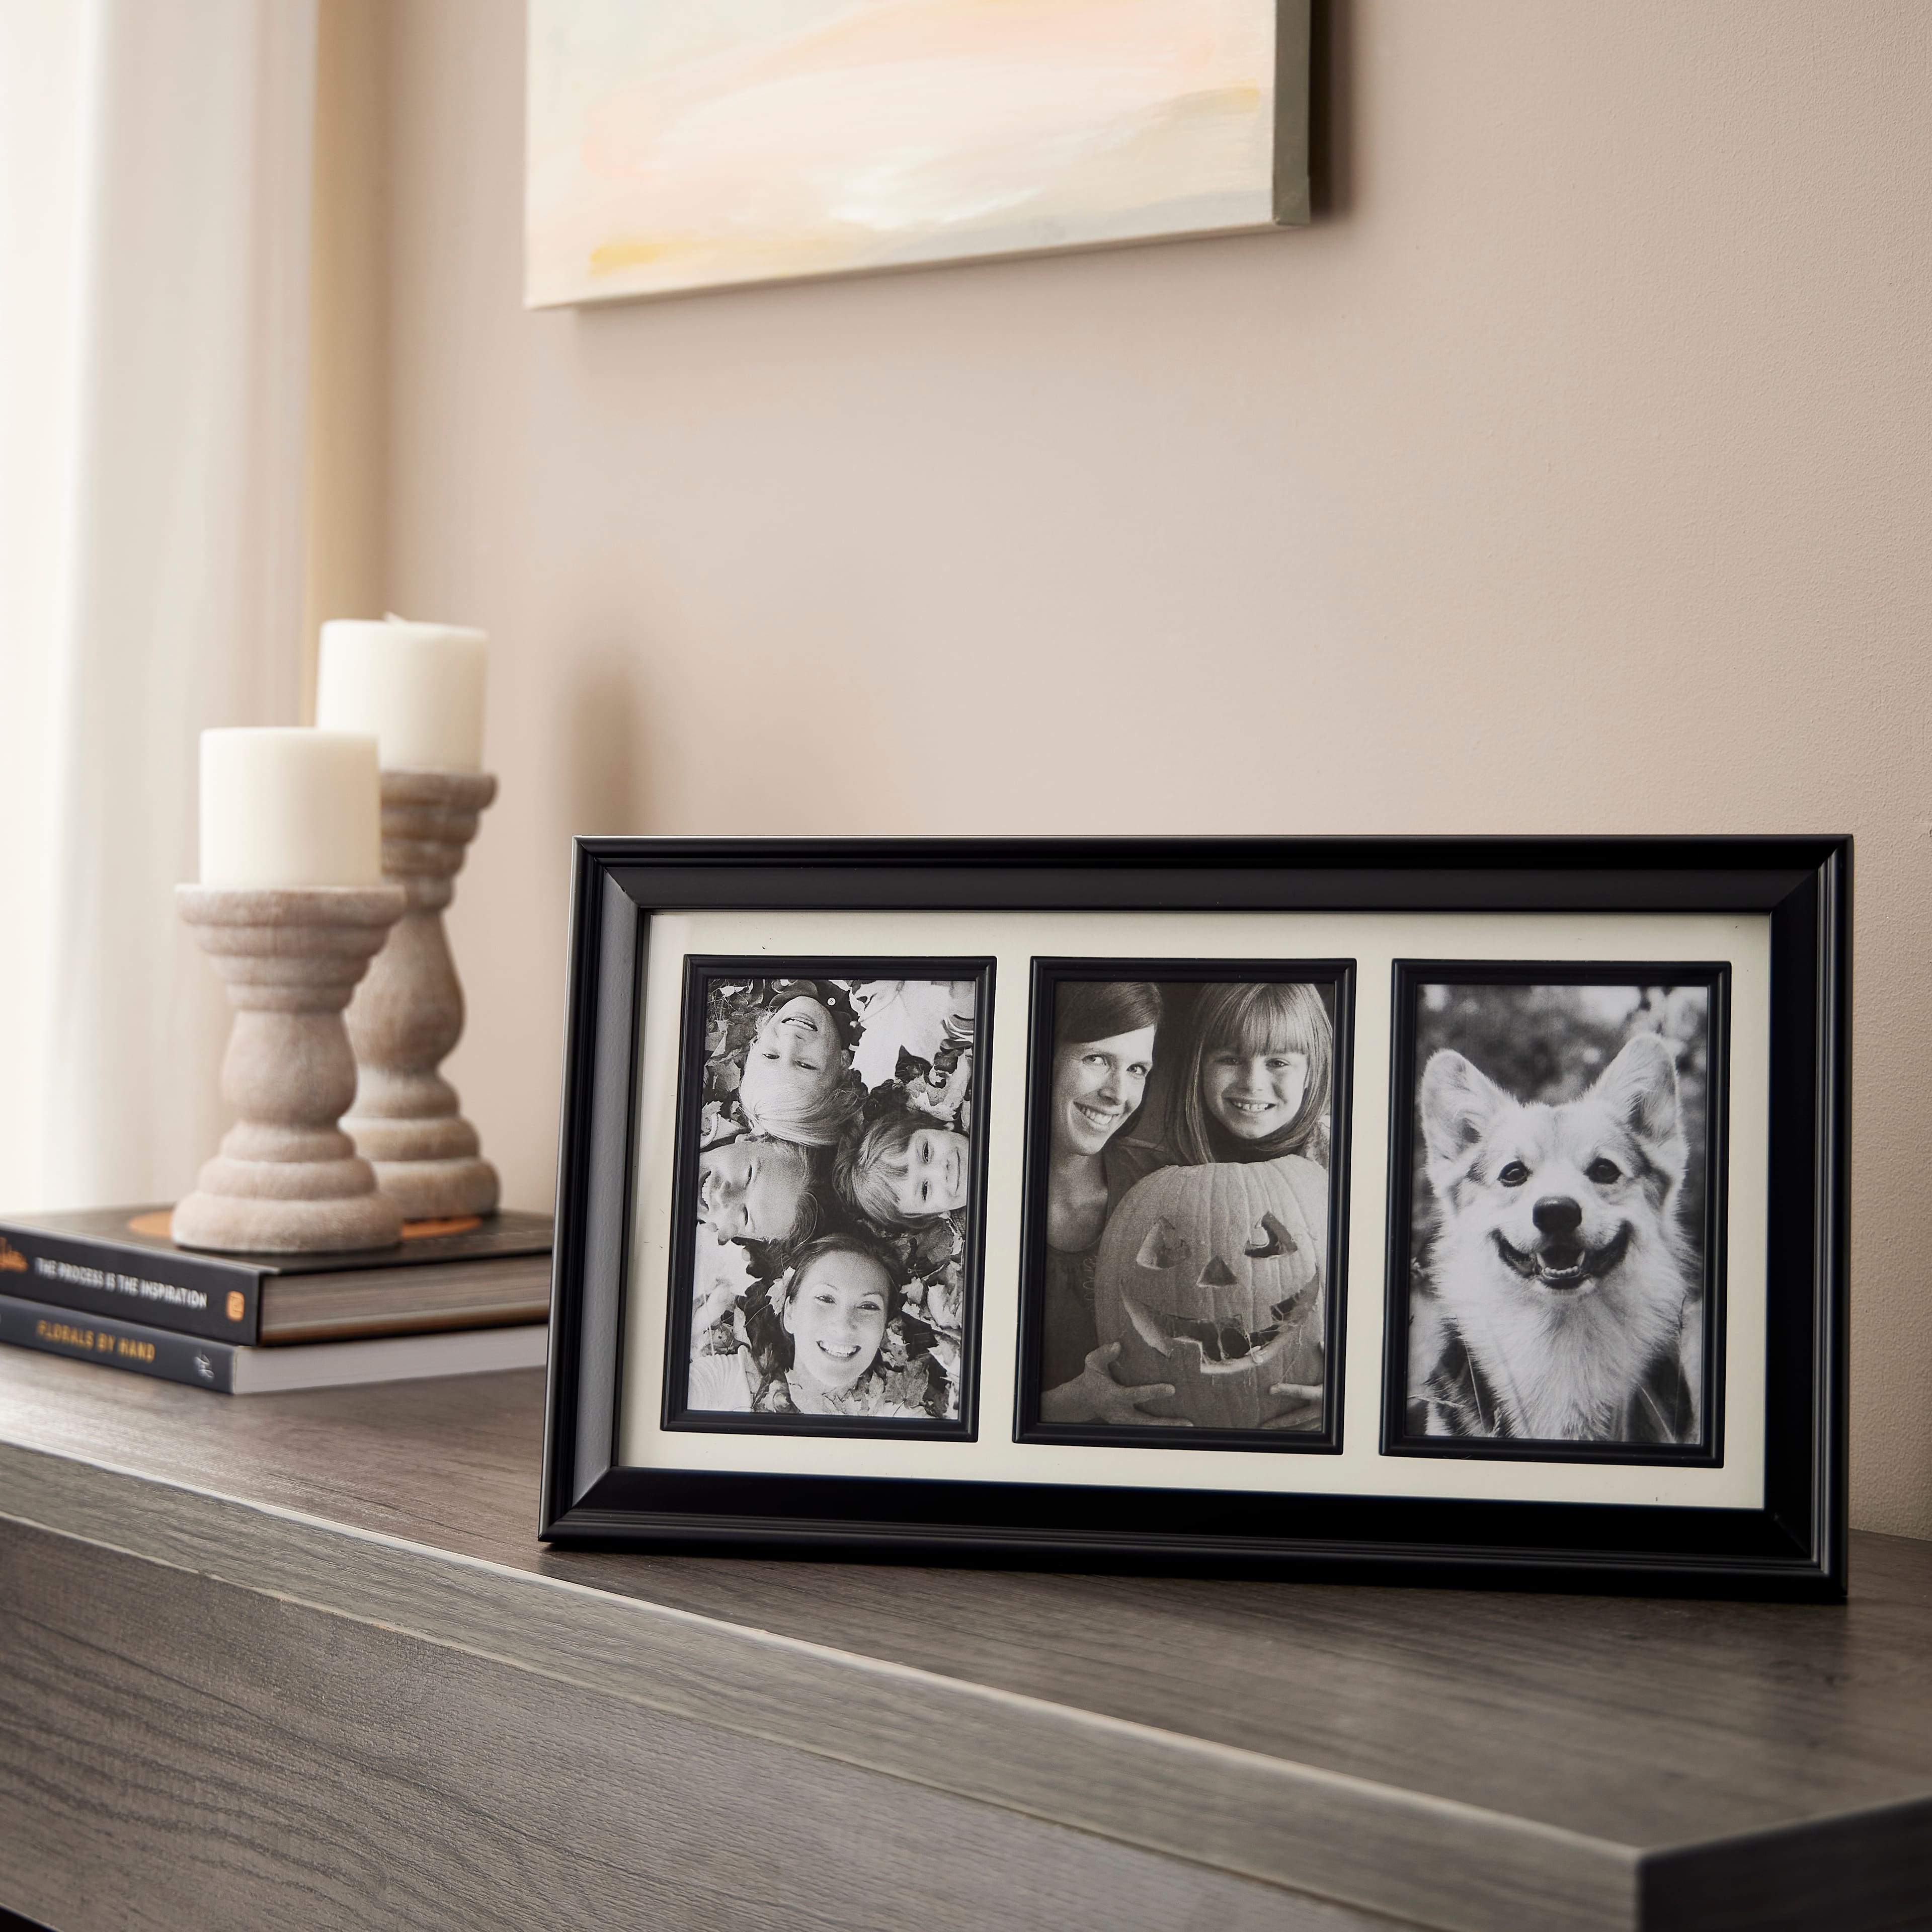 Shop for the 6-Opening Collage Frame, 5 x 7 By Studio Décor® at